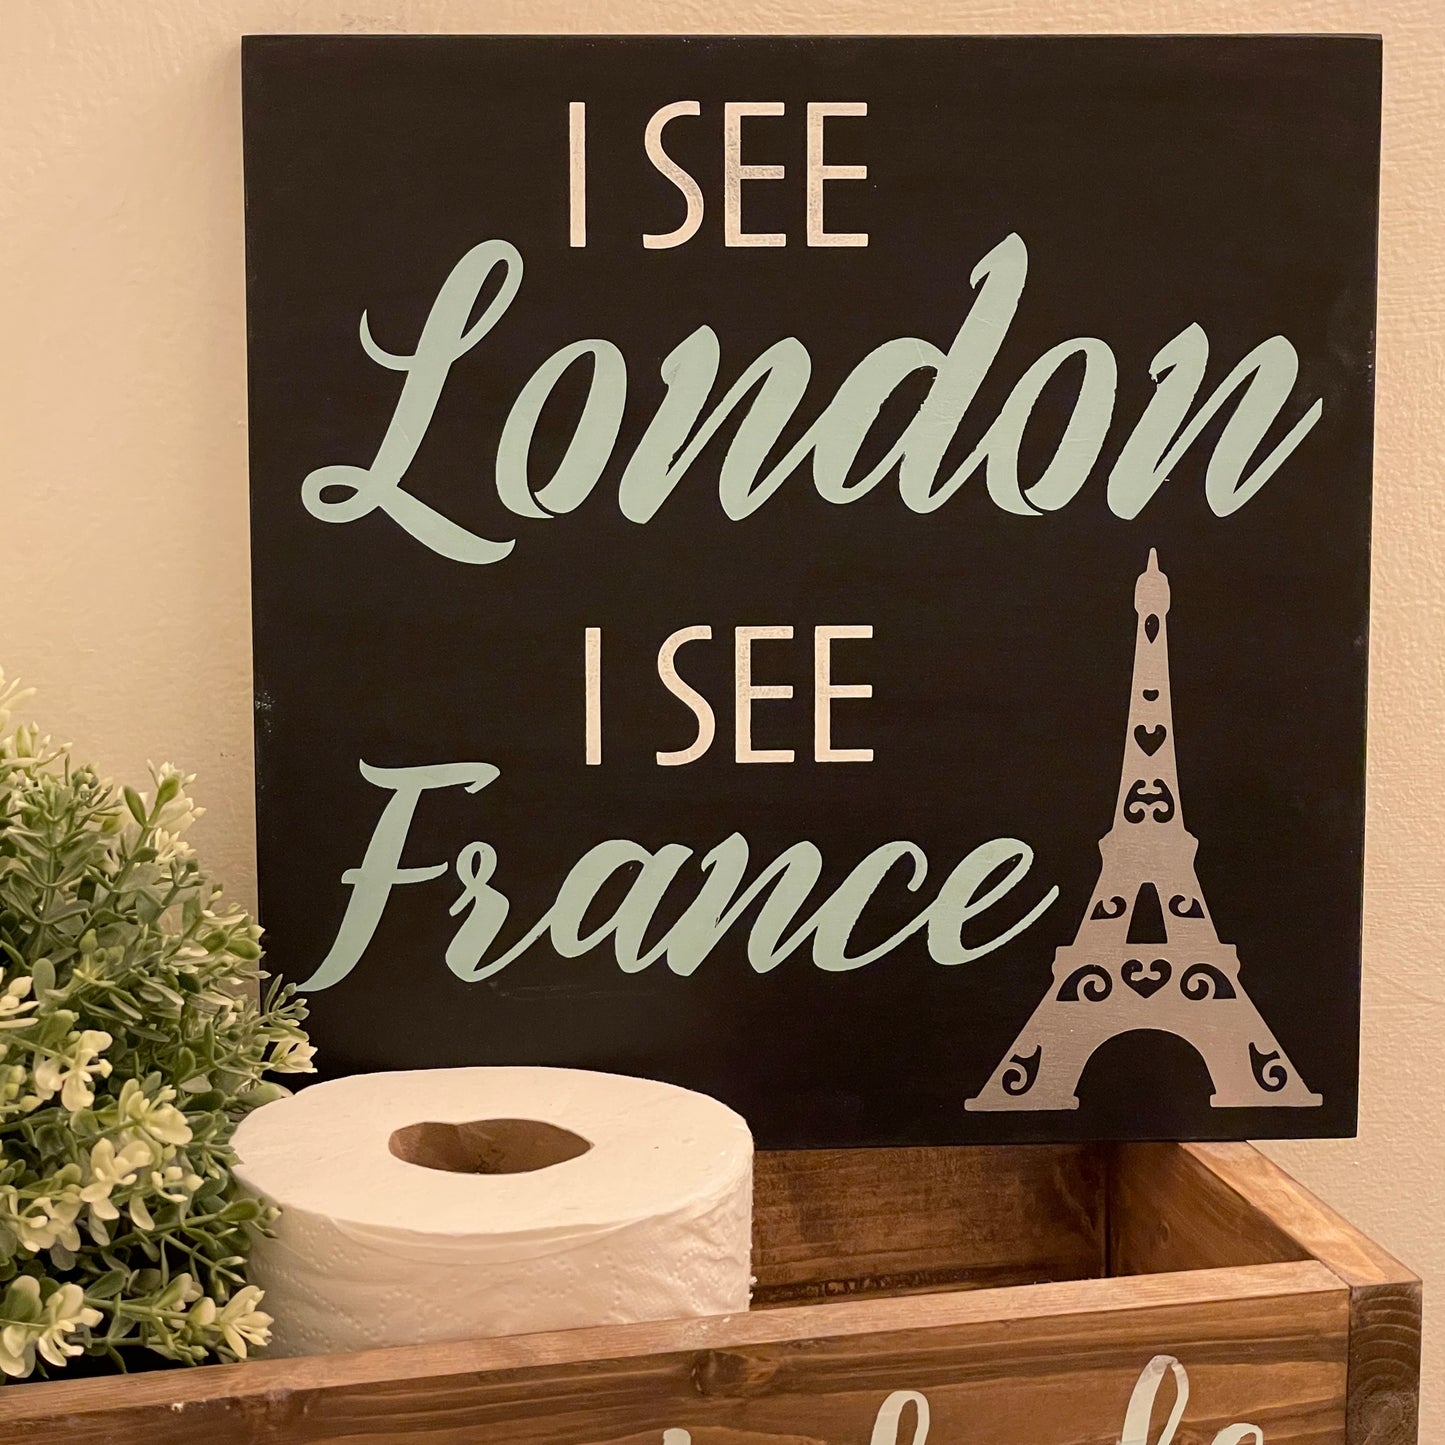 PAINTED - I see London I see France (12x12") - Paisley Grace Makery